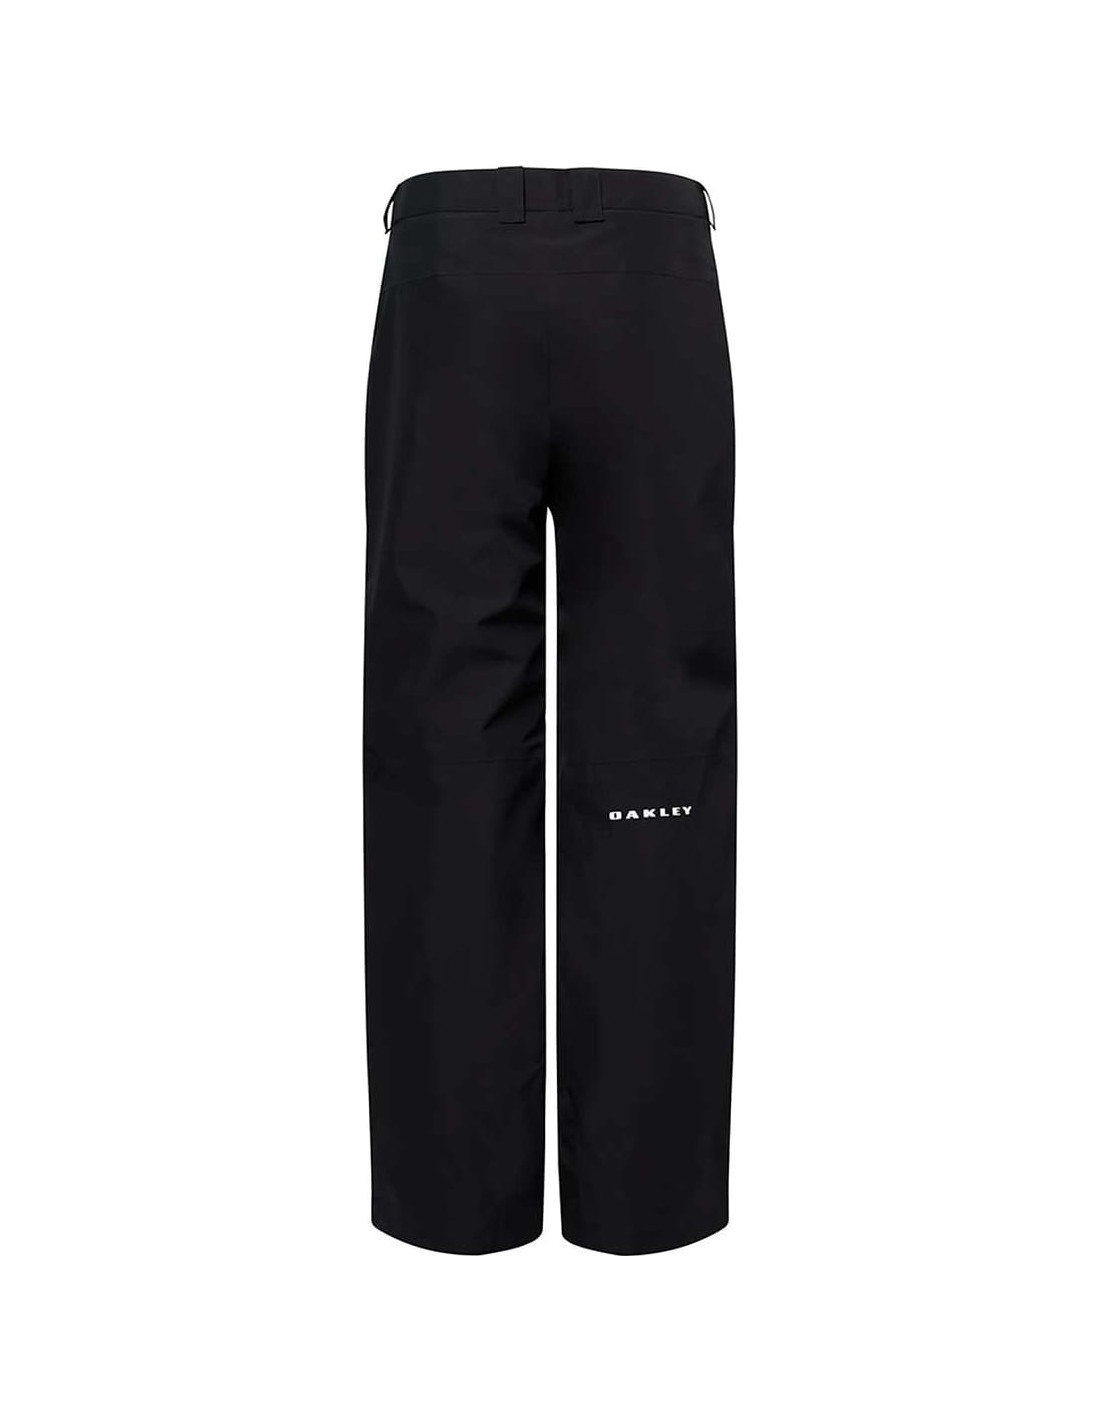 UNBOUND GORE-TEX SHELL PANT